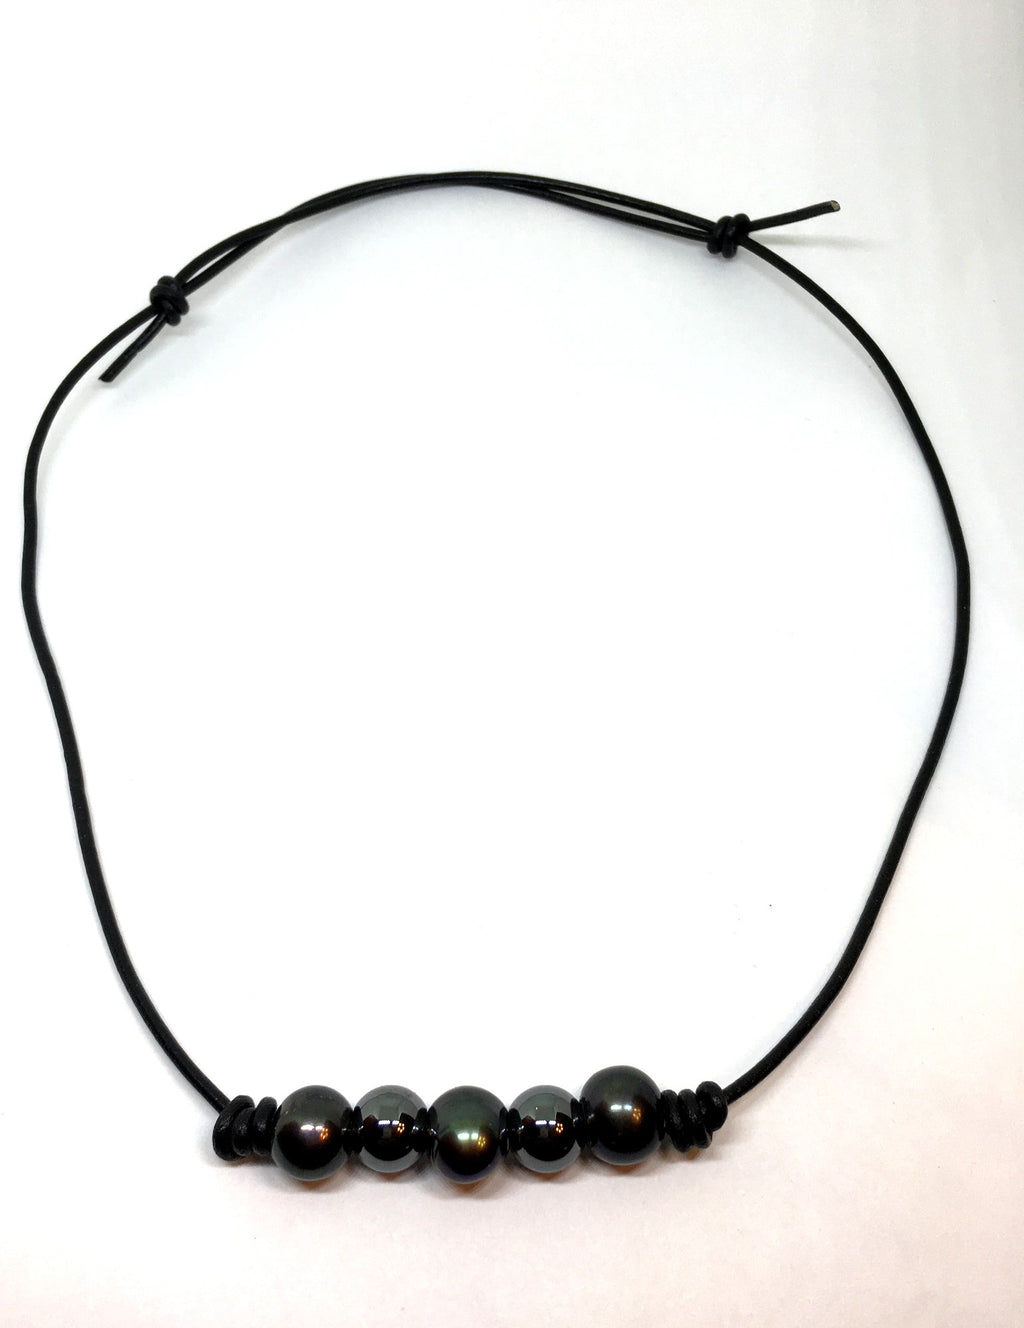 Buy Bico 4mm Black Leather Necklace CL6 Black at Ubuy India